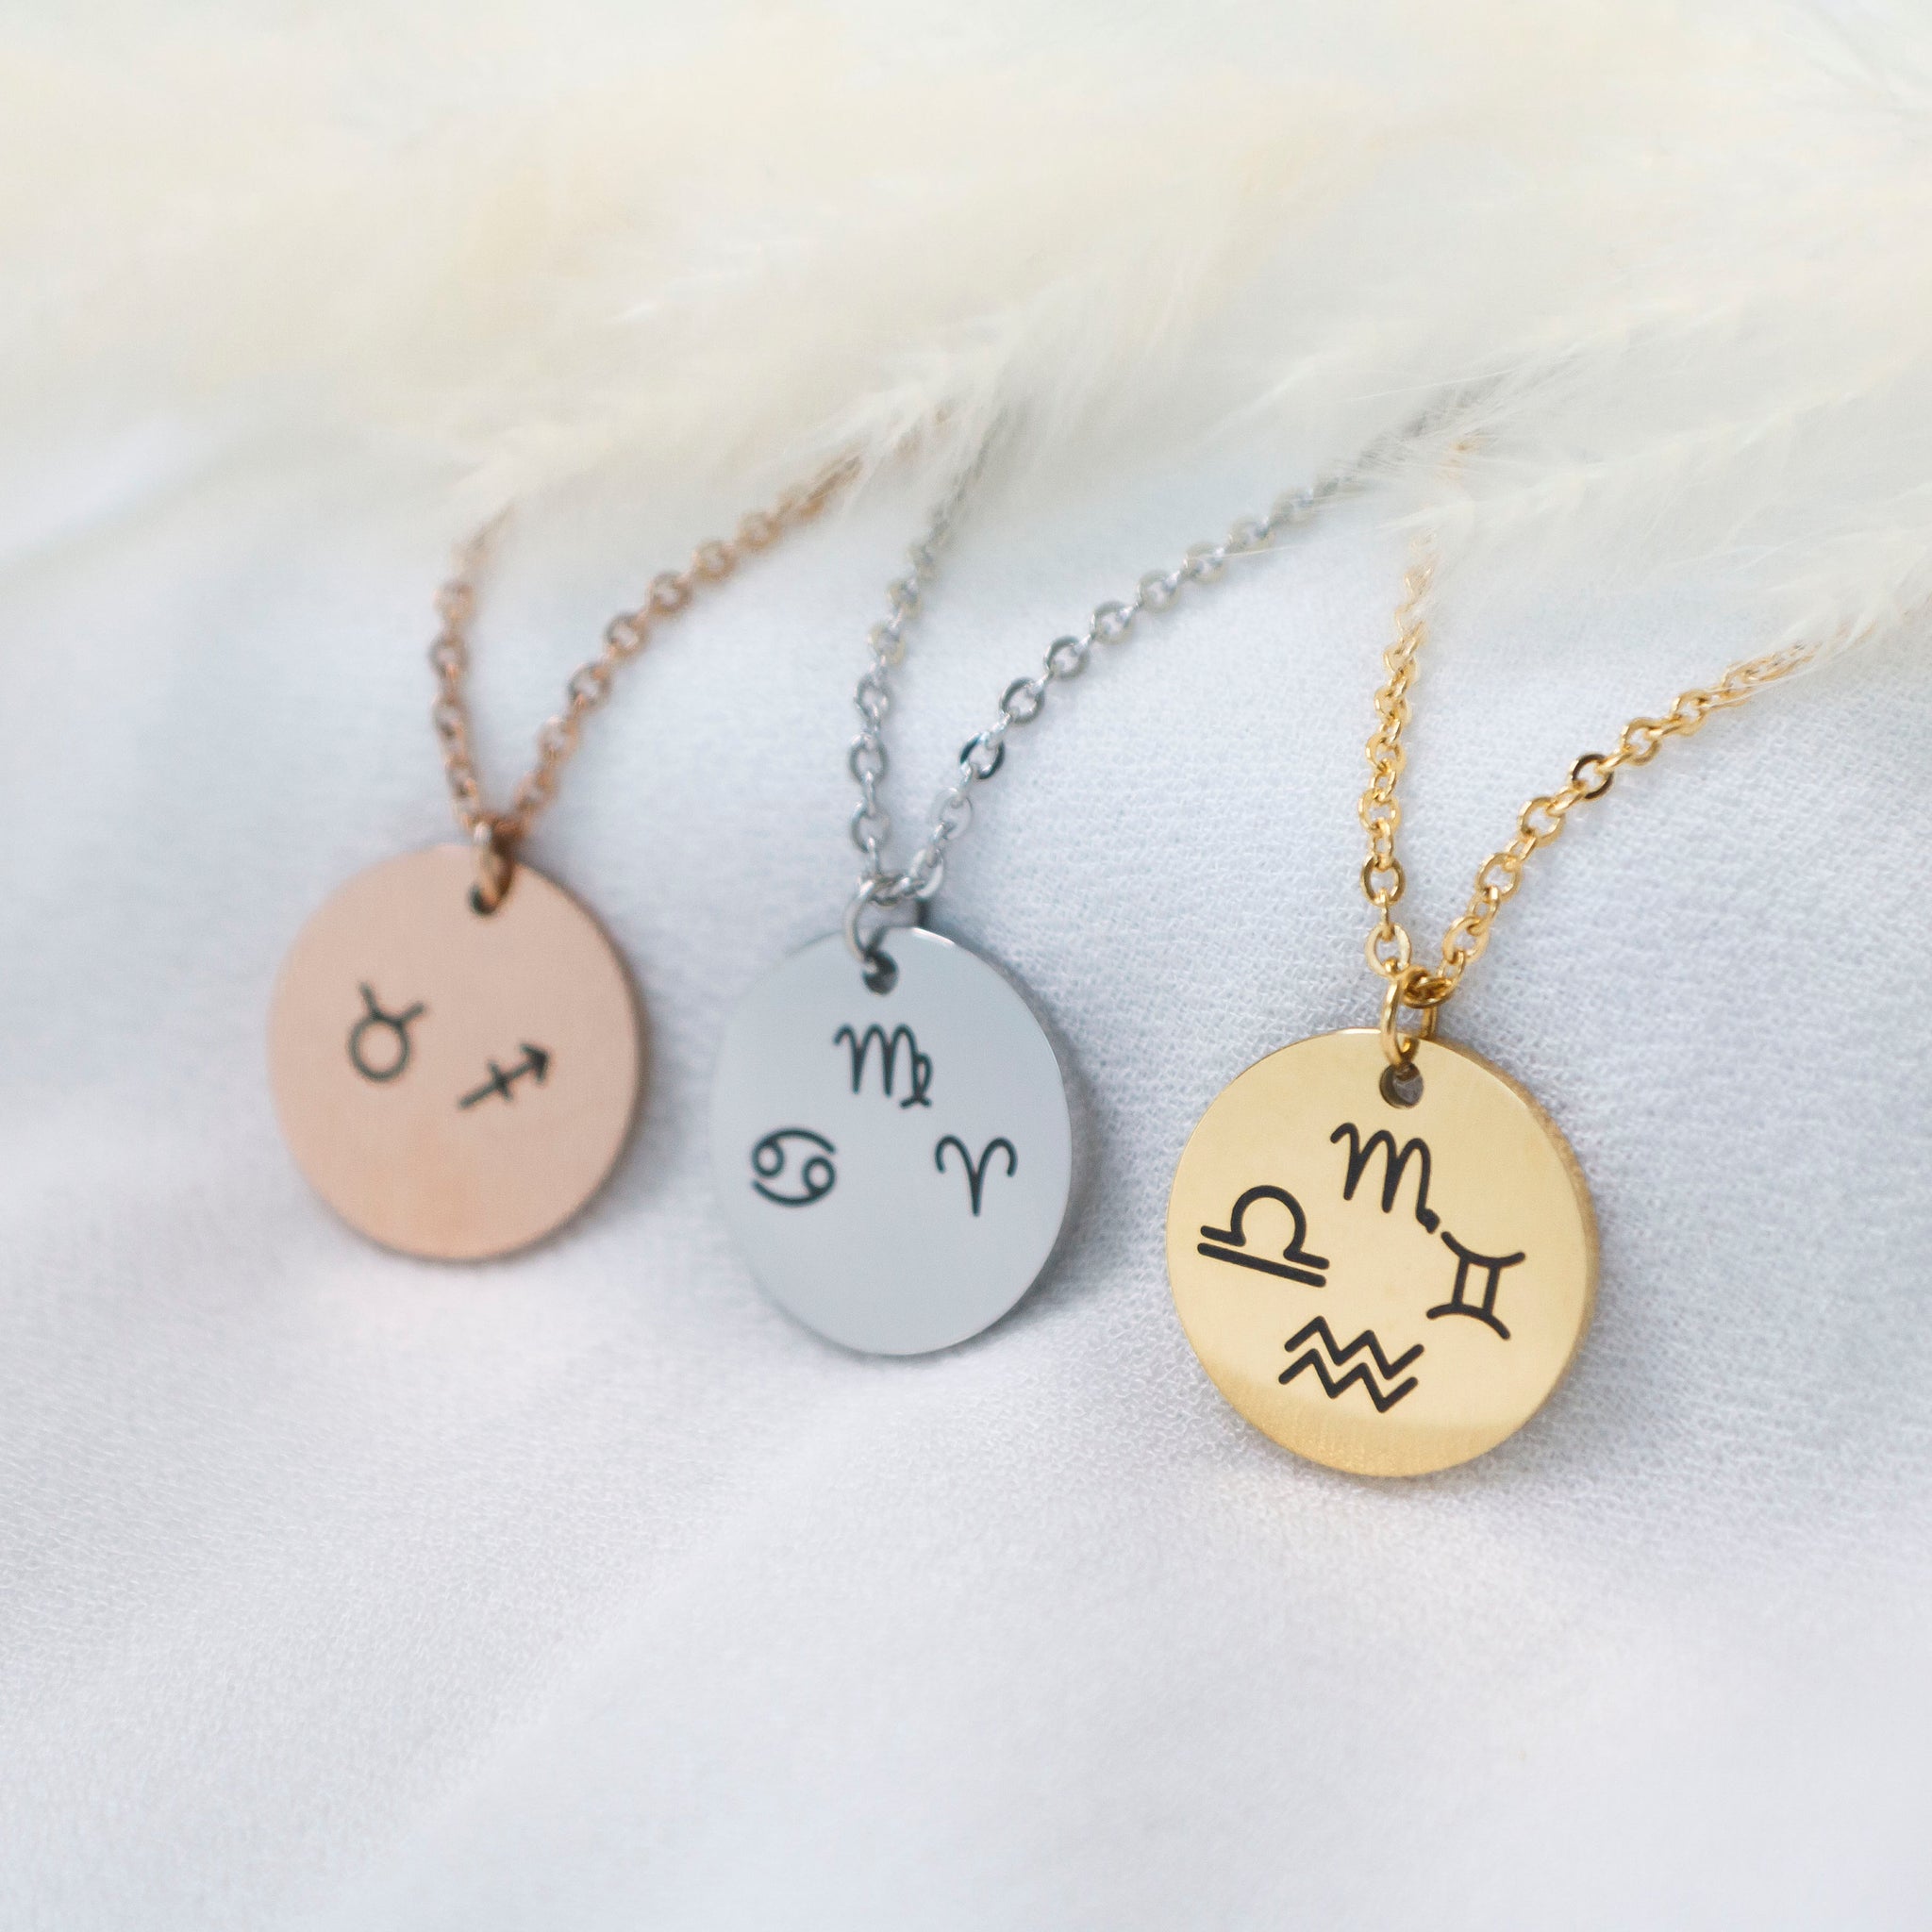 Personalized Mixed Zodiac Signs Necklace, Family Necklace, Horoscope Jewelry, Gift for mom, Birthday Present, gift for her